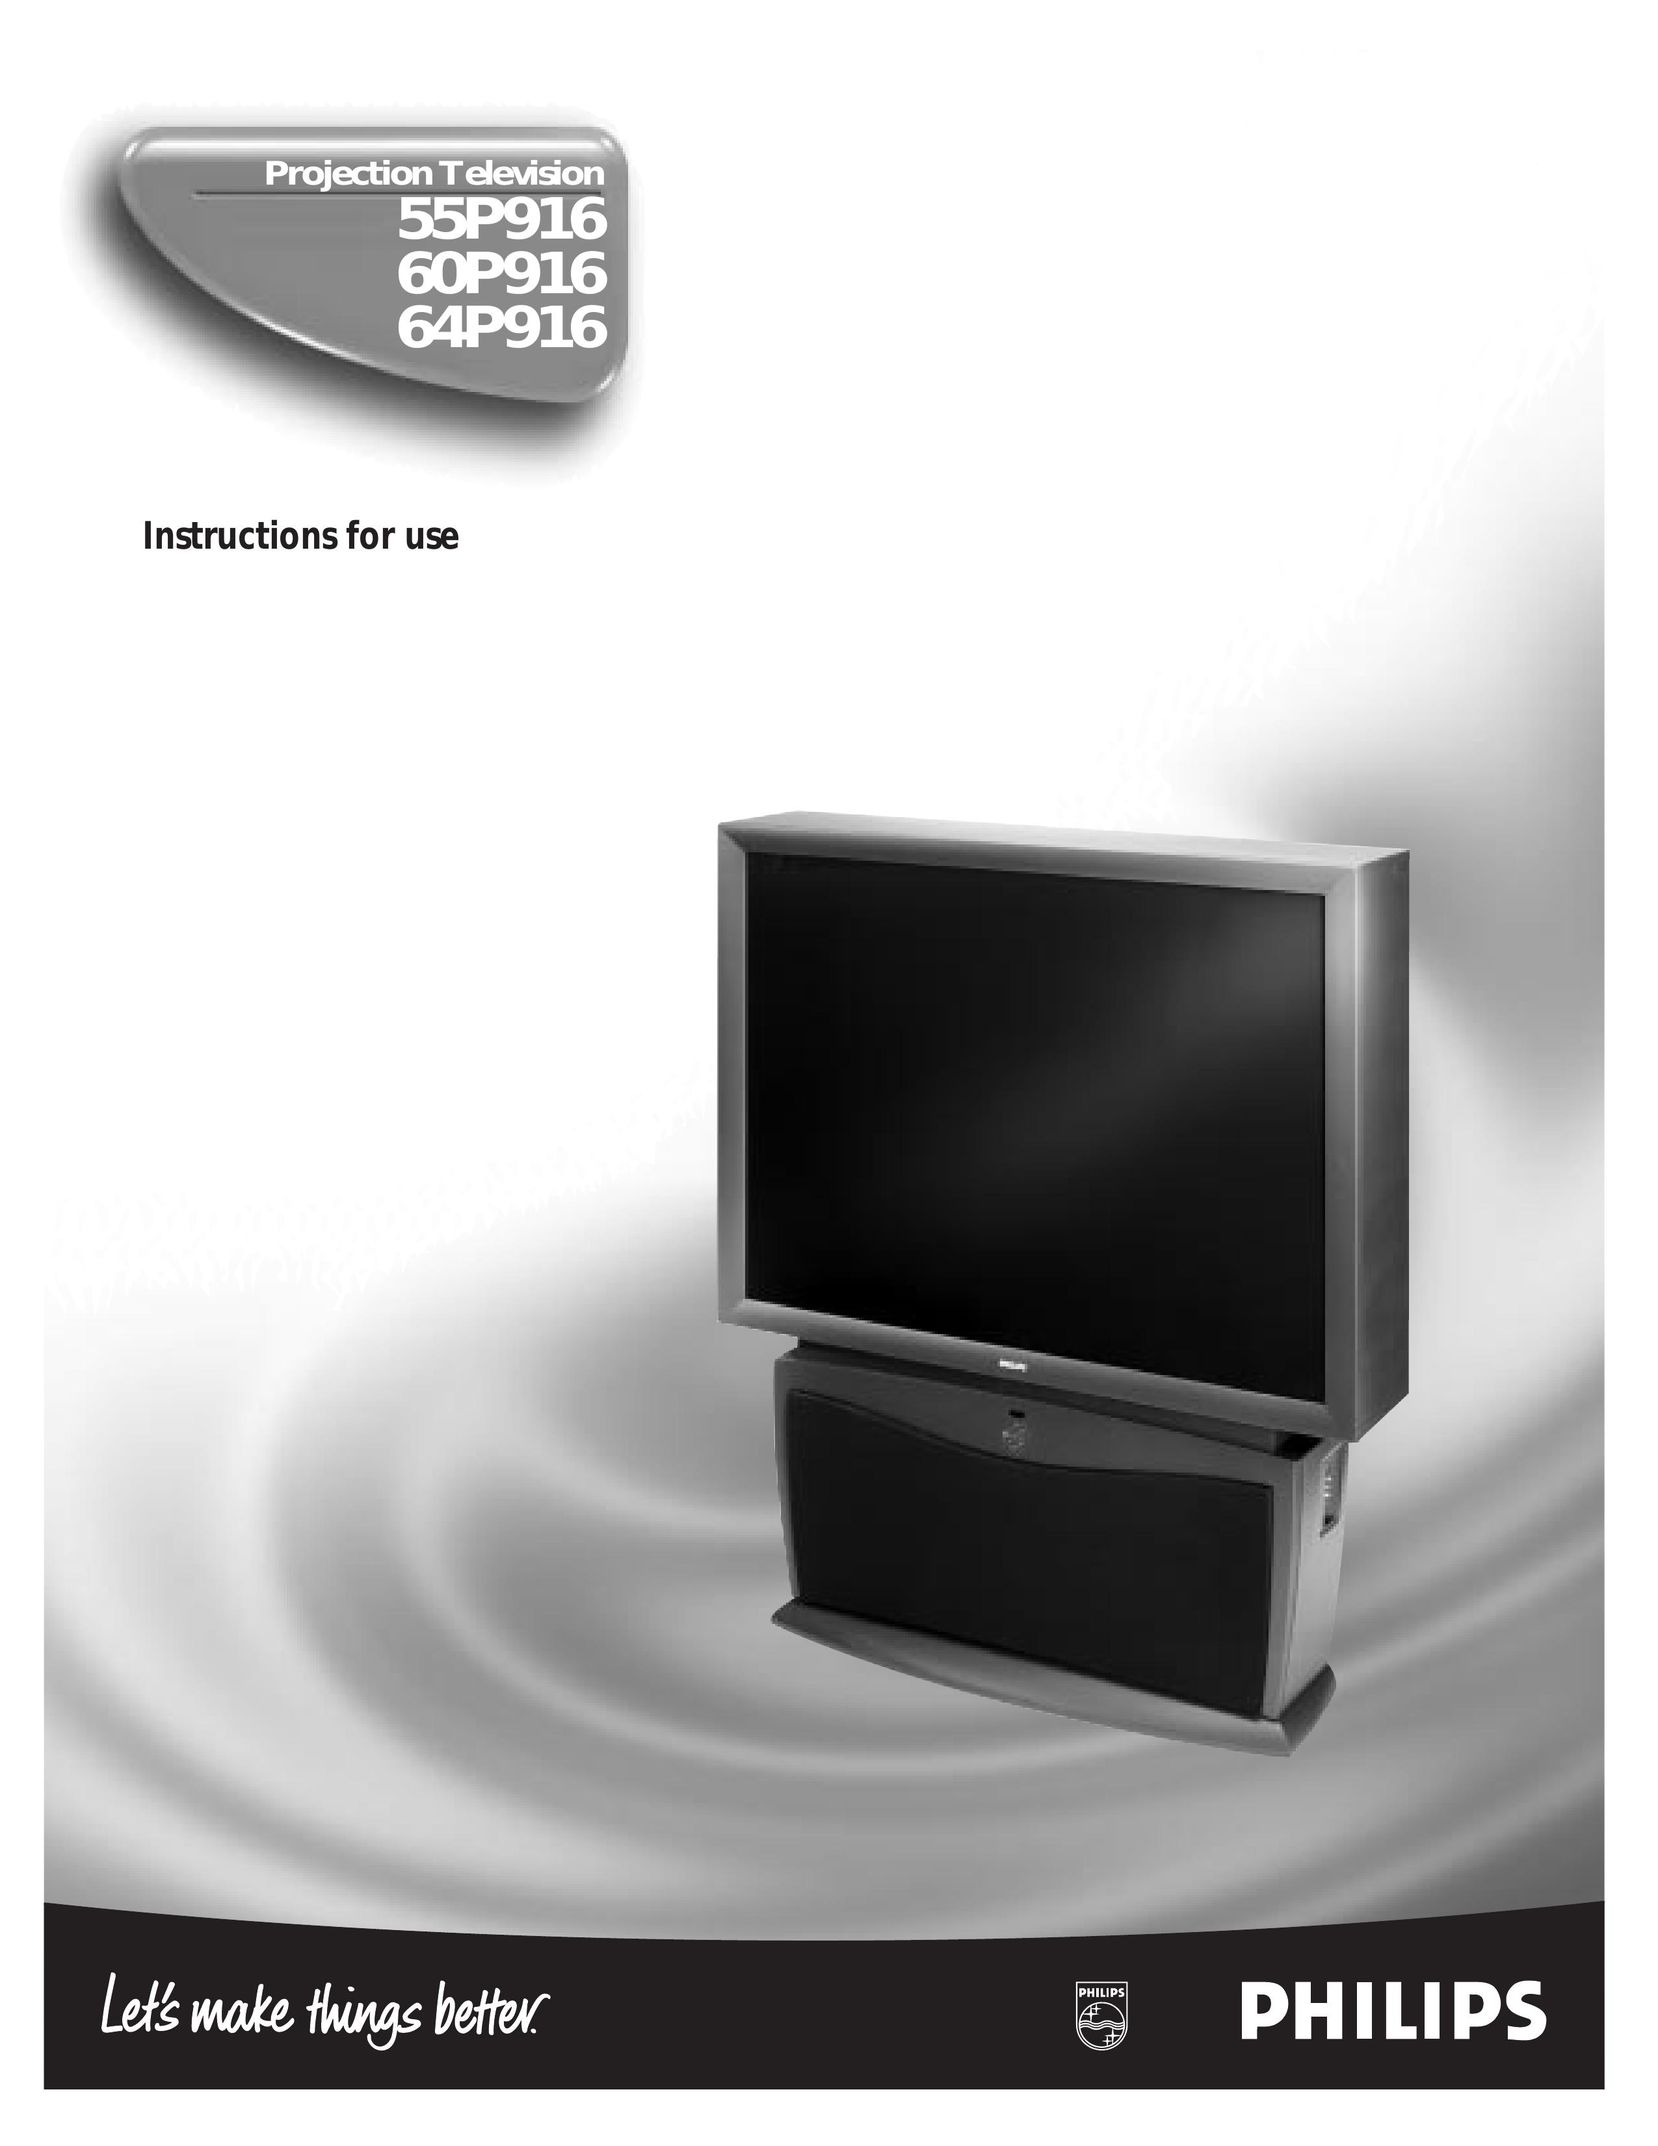 Magnavox 55P916 Projection Television User Manual